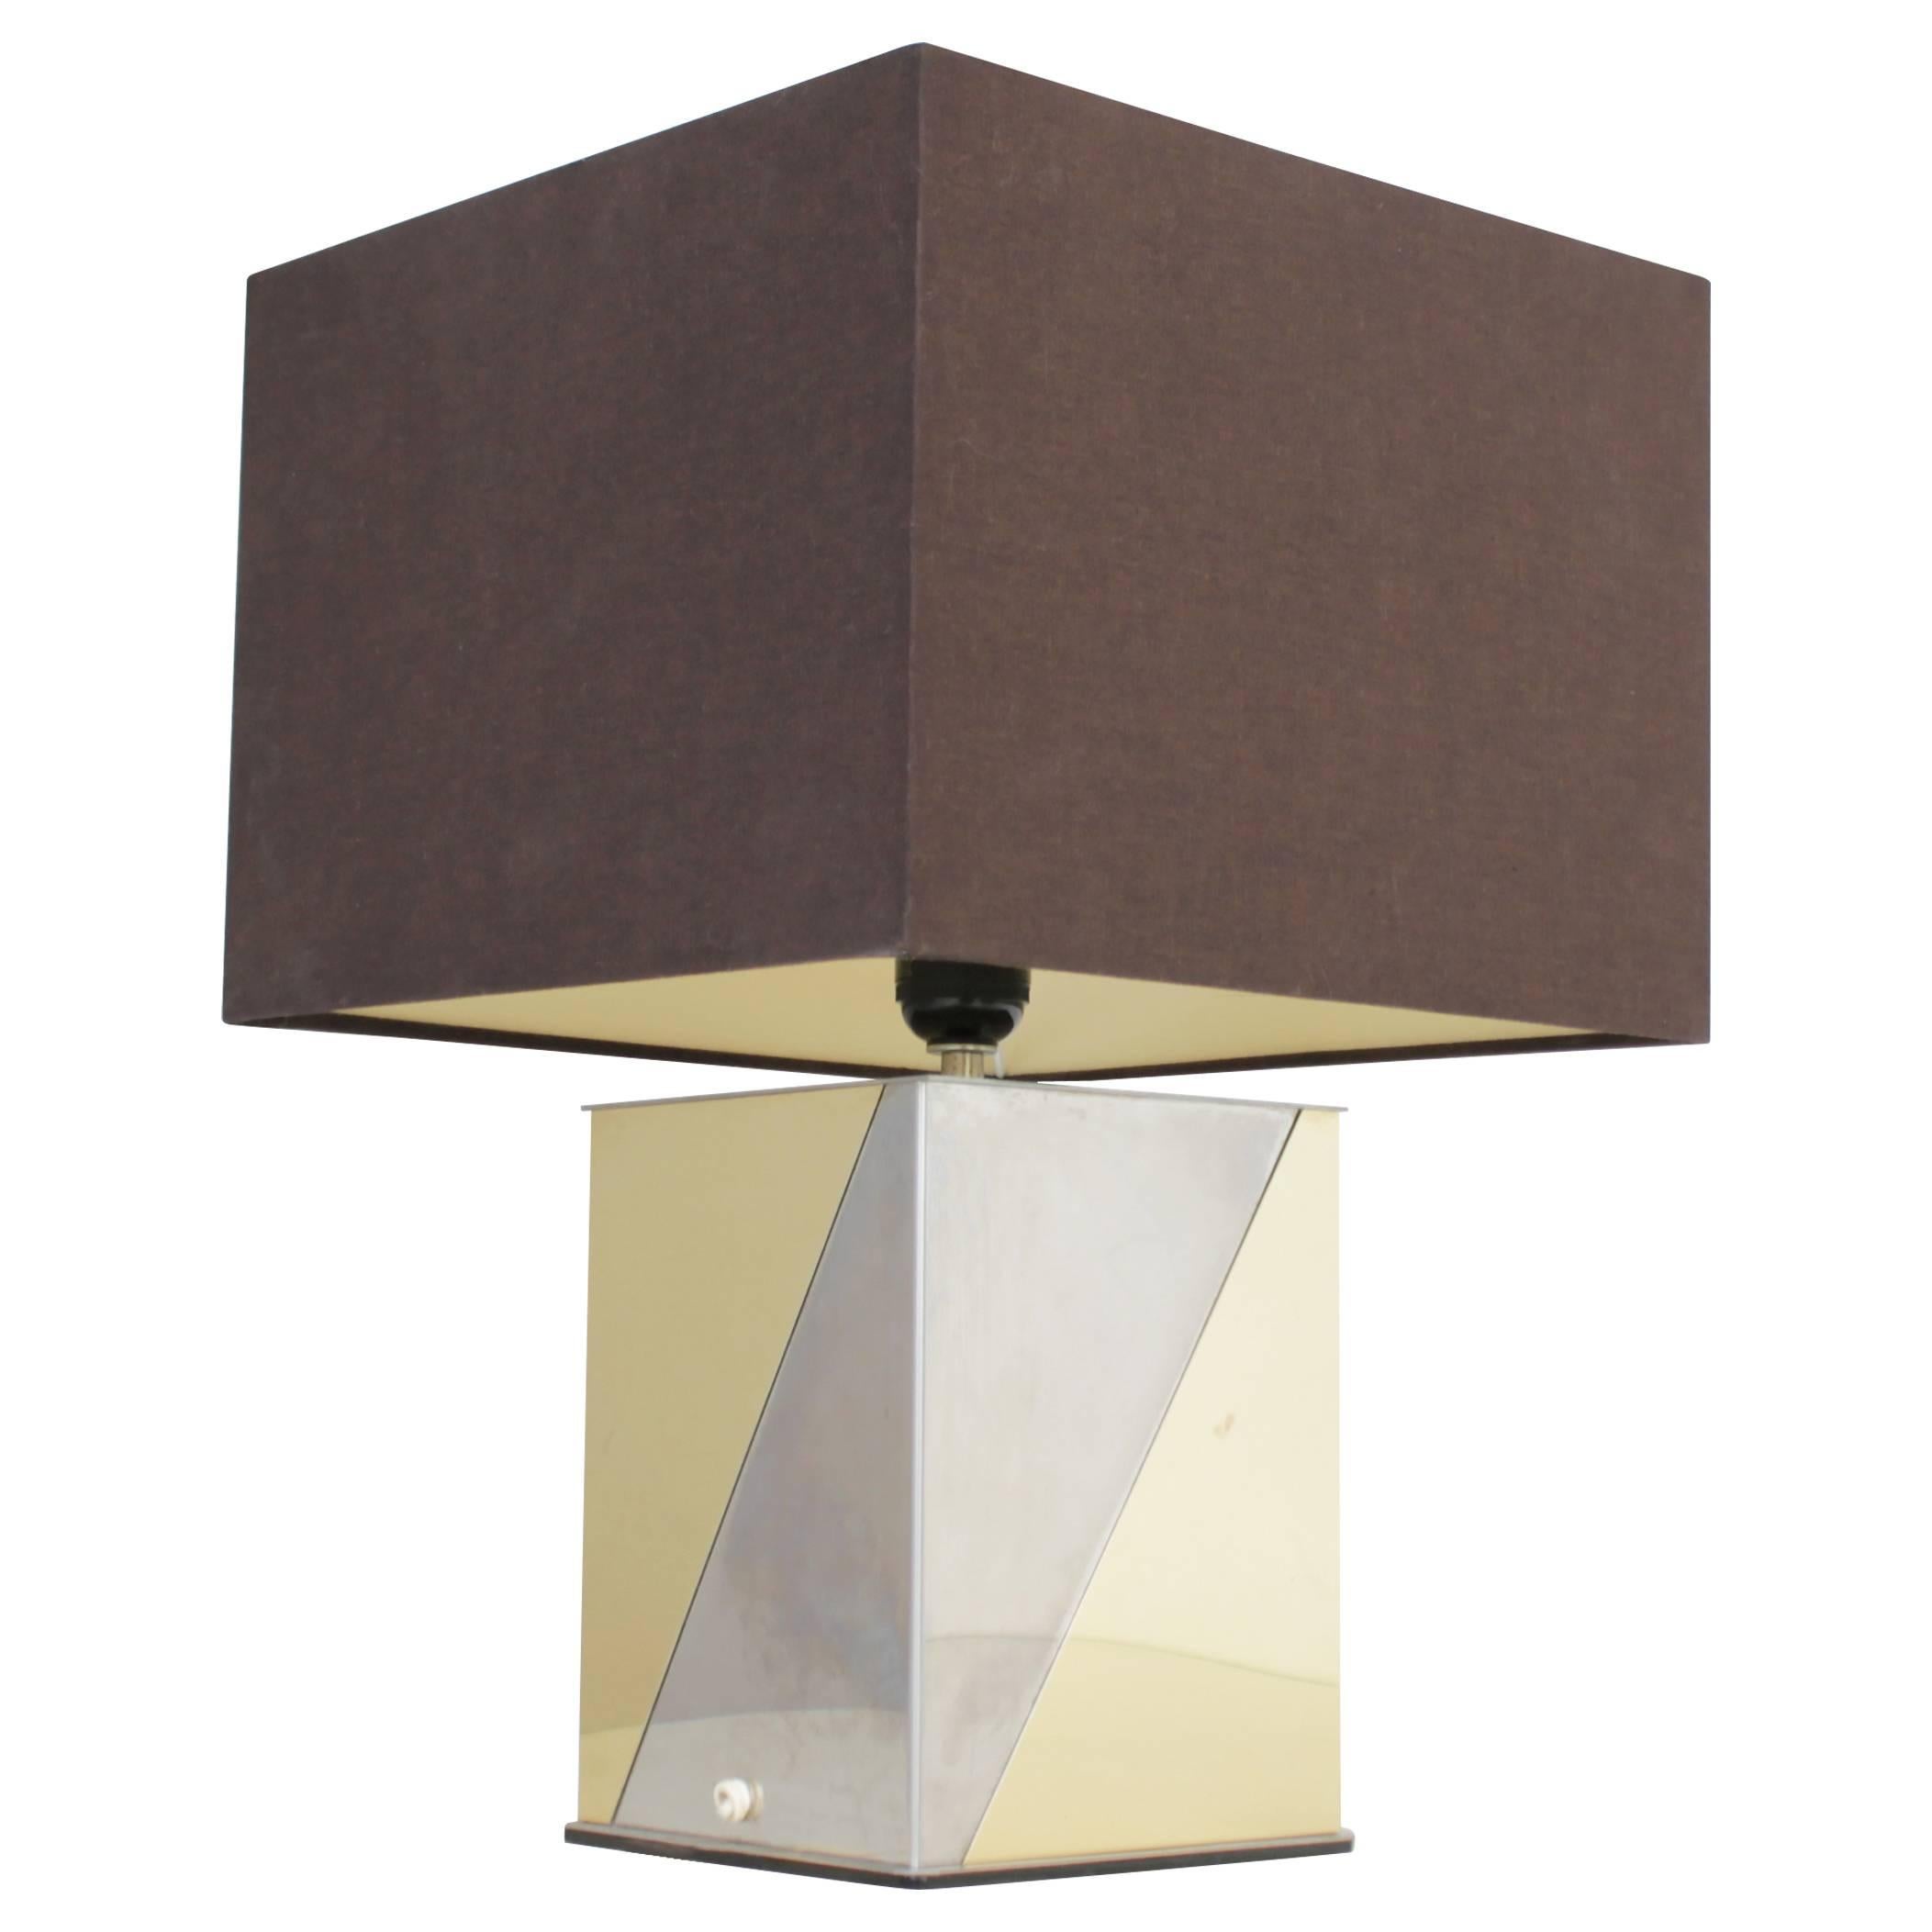 Architectural Table Lamp in the Manner of Paul Evans